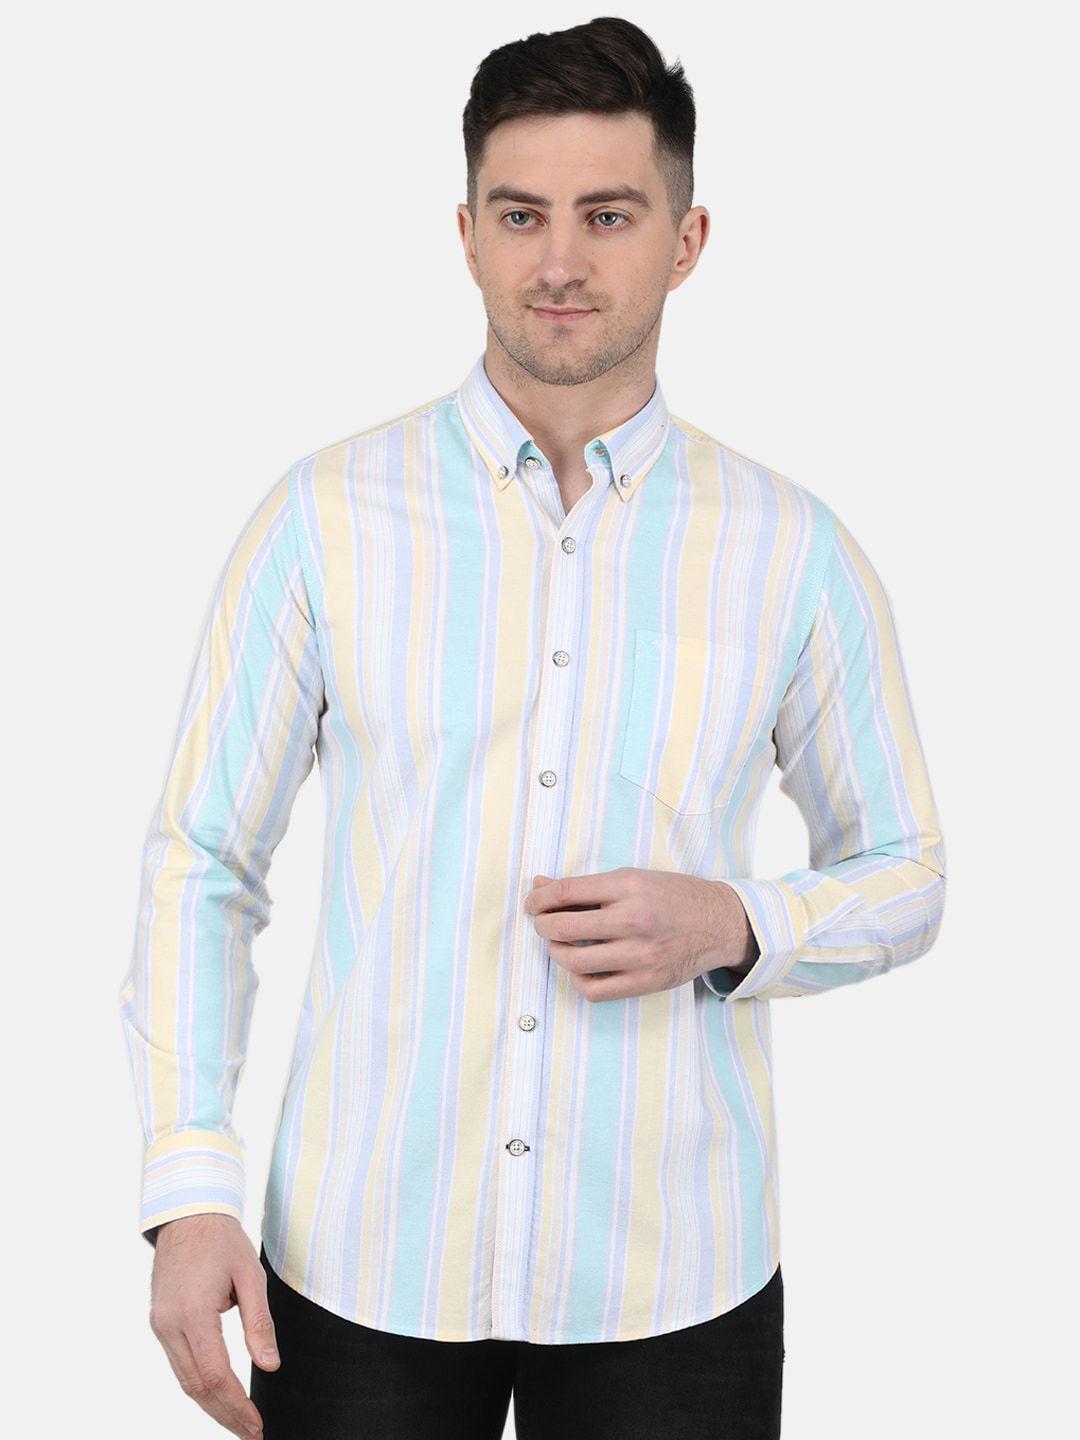 monte carlo straight vertical stripes striped casual shirt